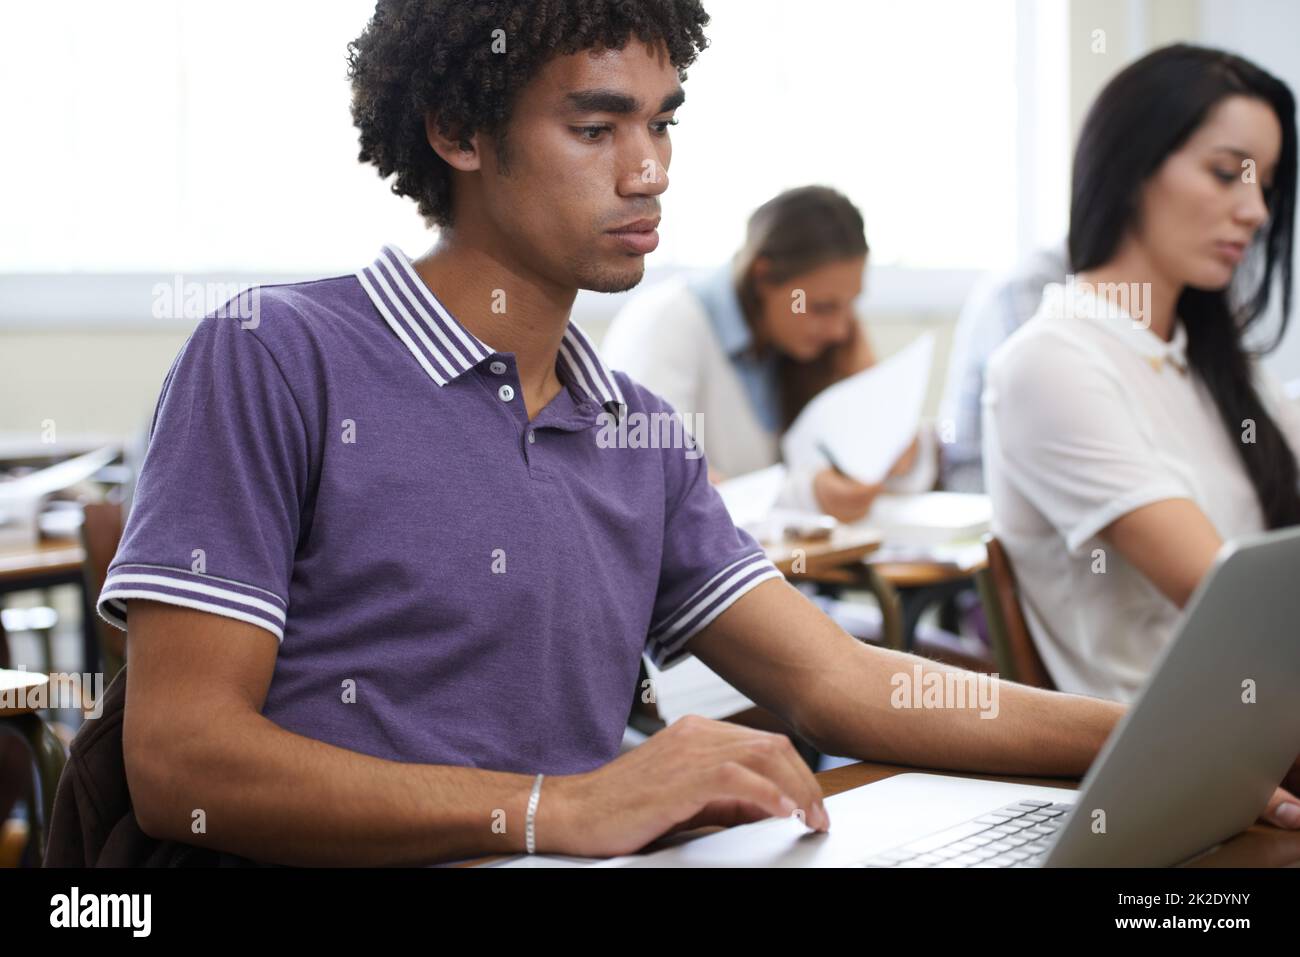 Immersed in his project. Shot of a group of university students working on laptops in class. Stock Photo